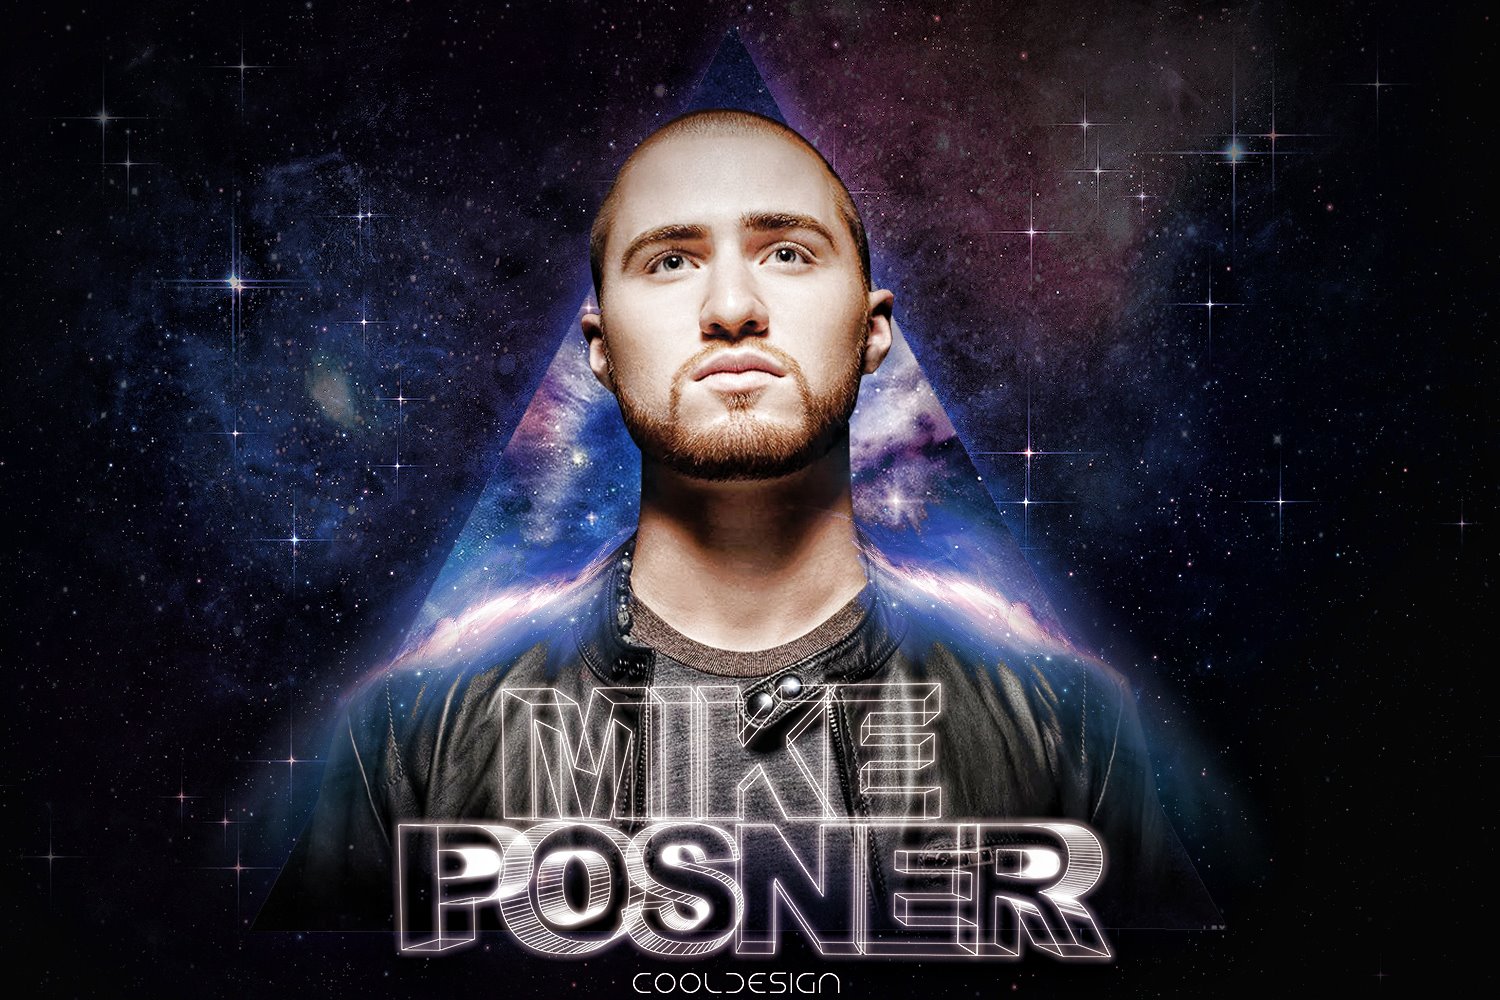 Mike Posner
Created by Cool Design
